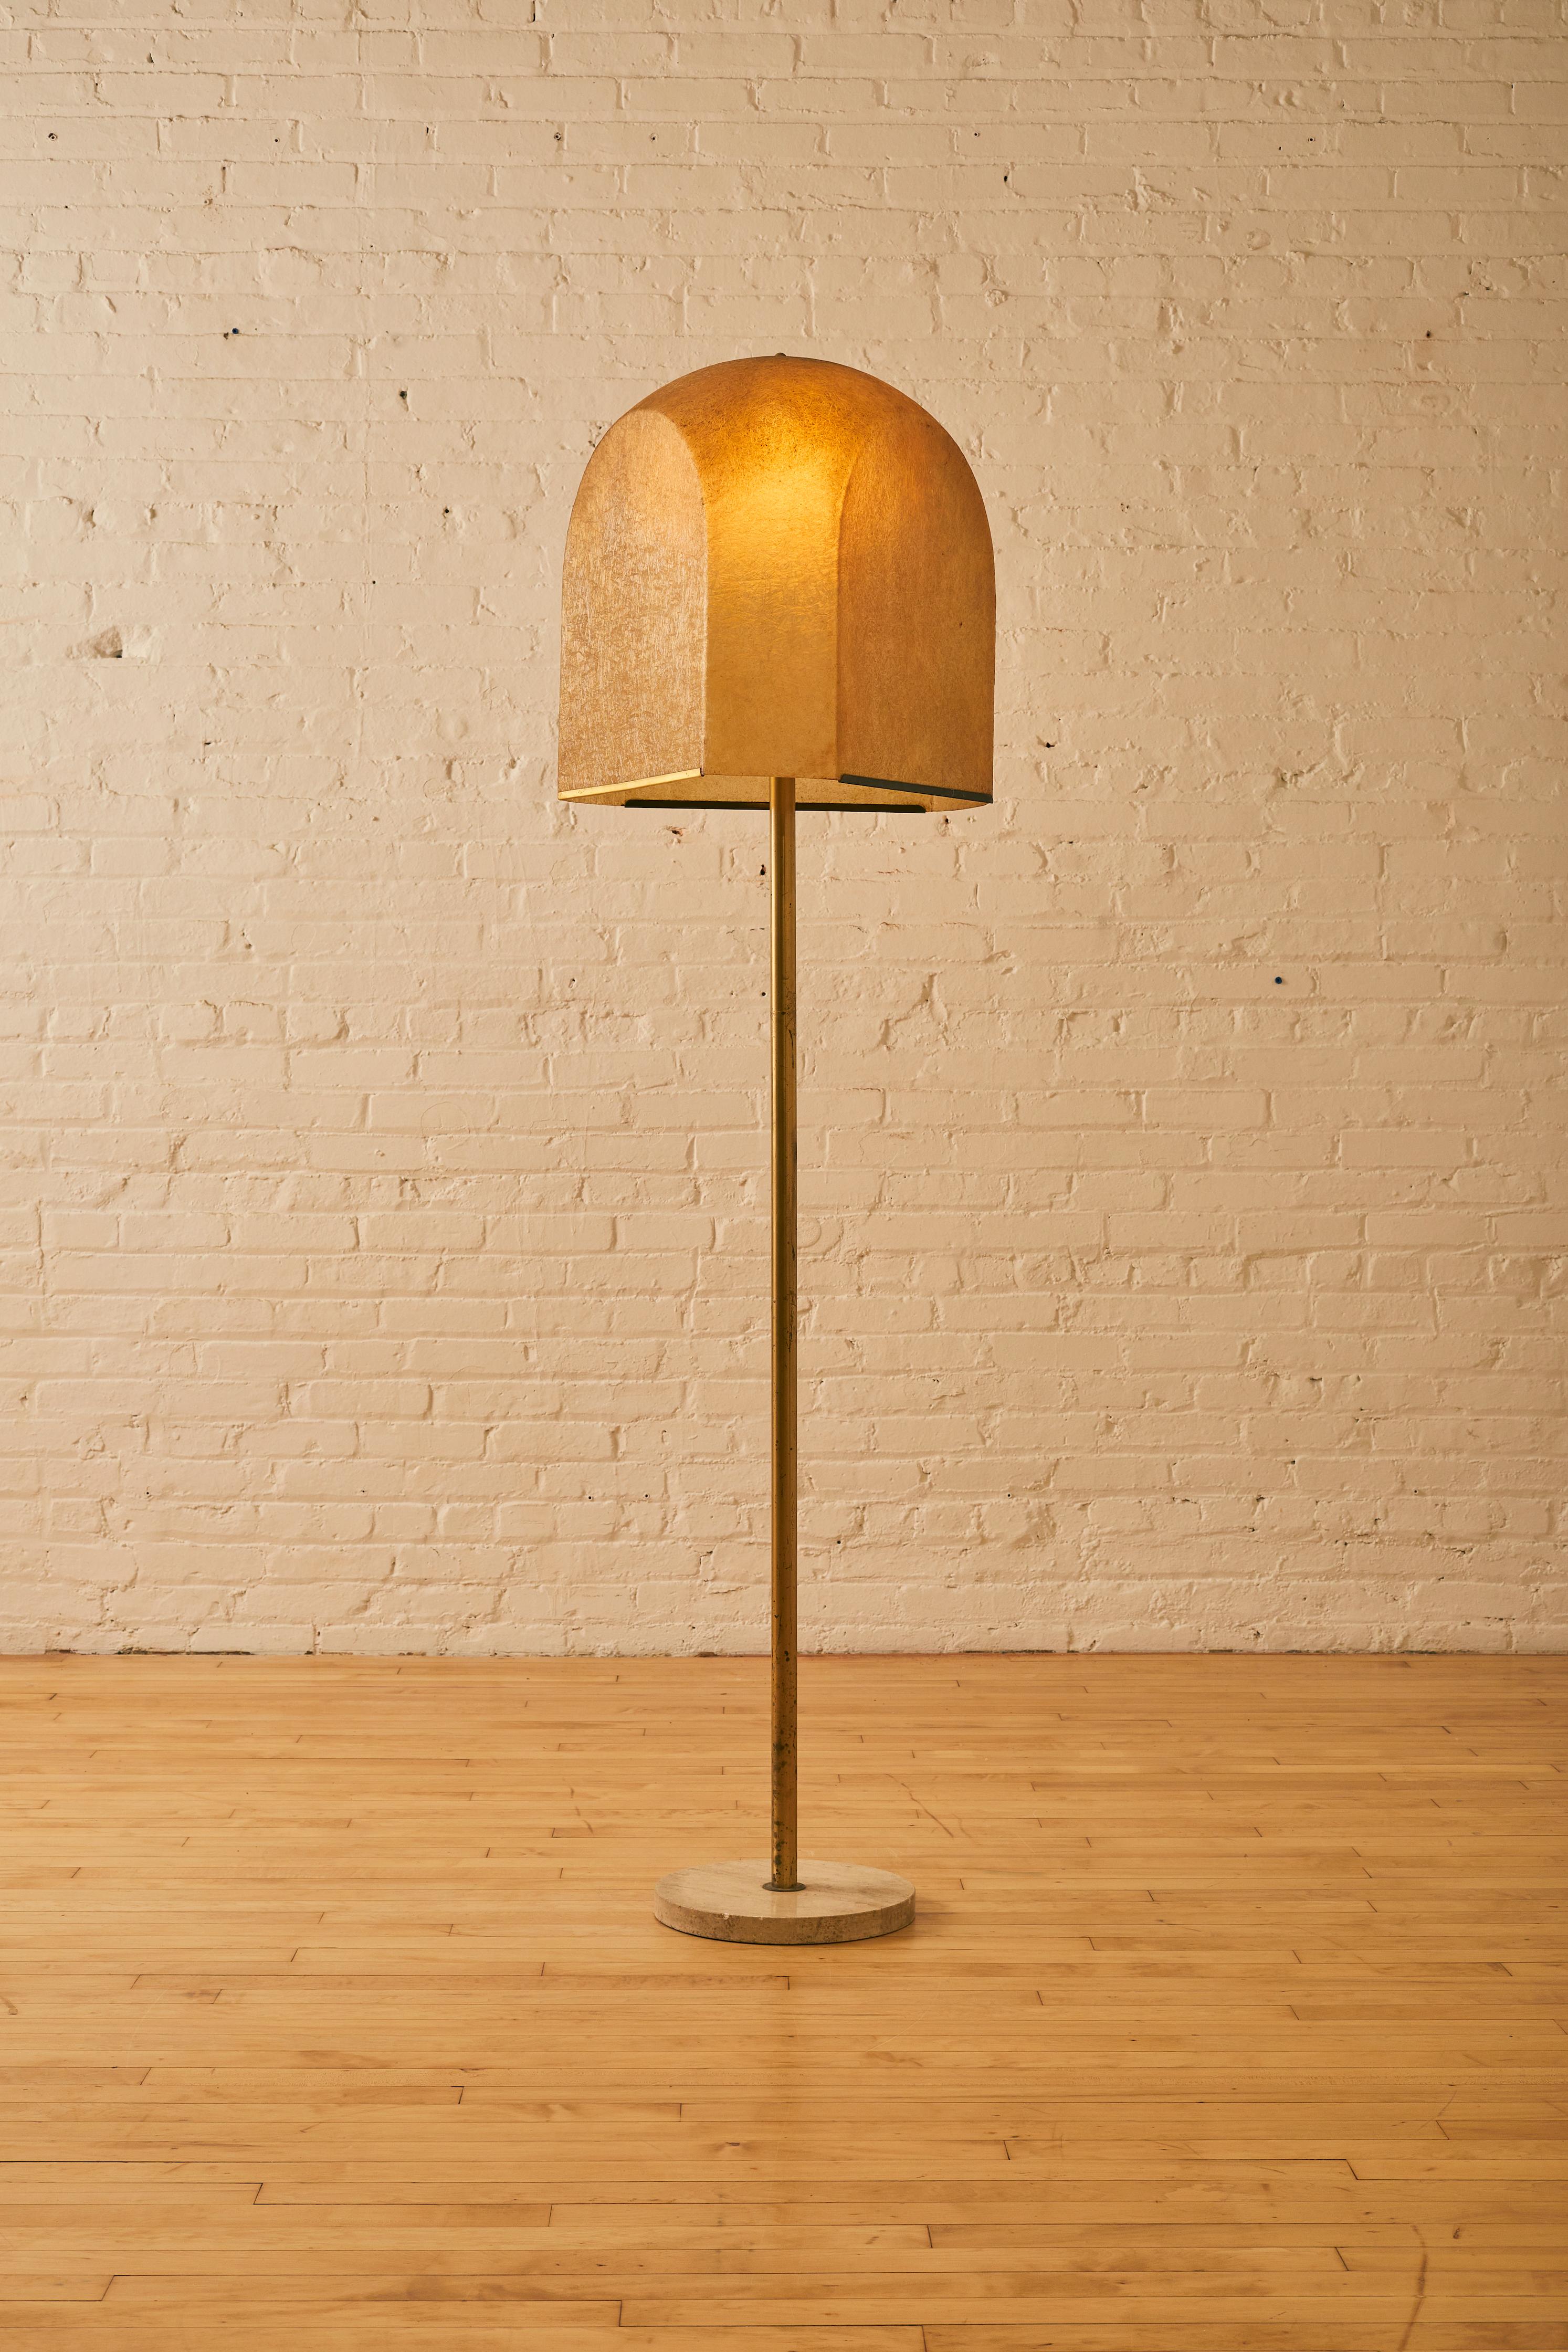 Floor Lamp by Salvatorre Gregorietti with a fiberglass shade, brass body, and travertine base.

